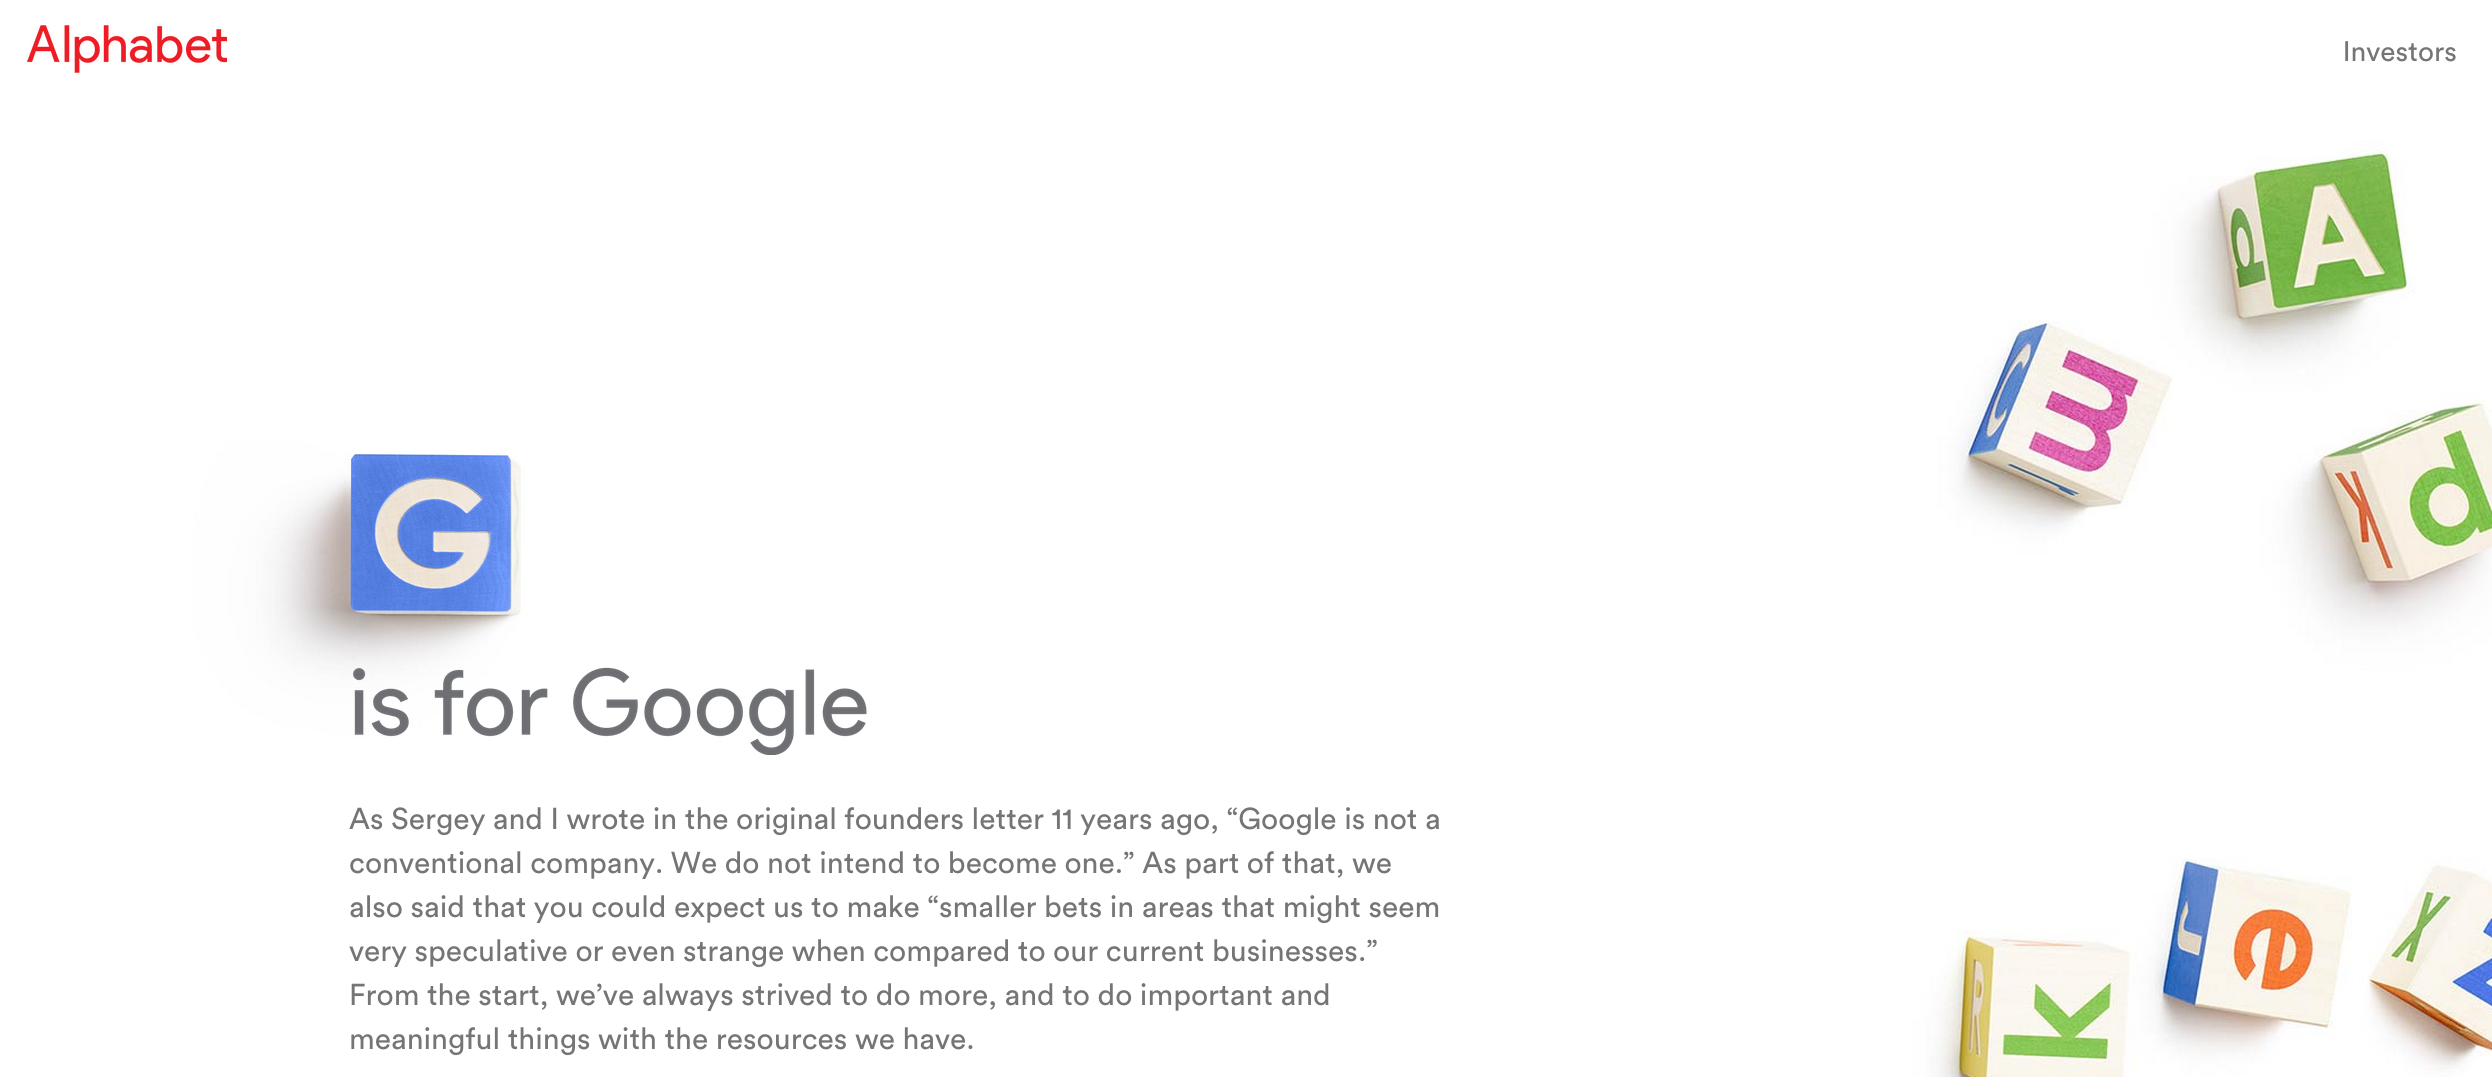 Google To Officially Become Part Of “Alphabet” Holding Company This Afternoon